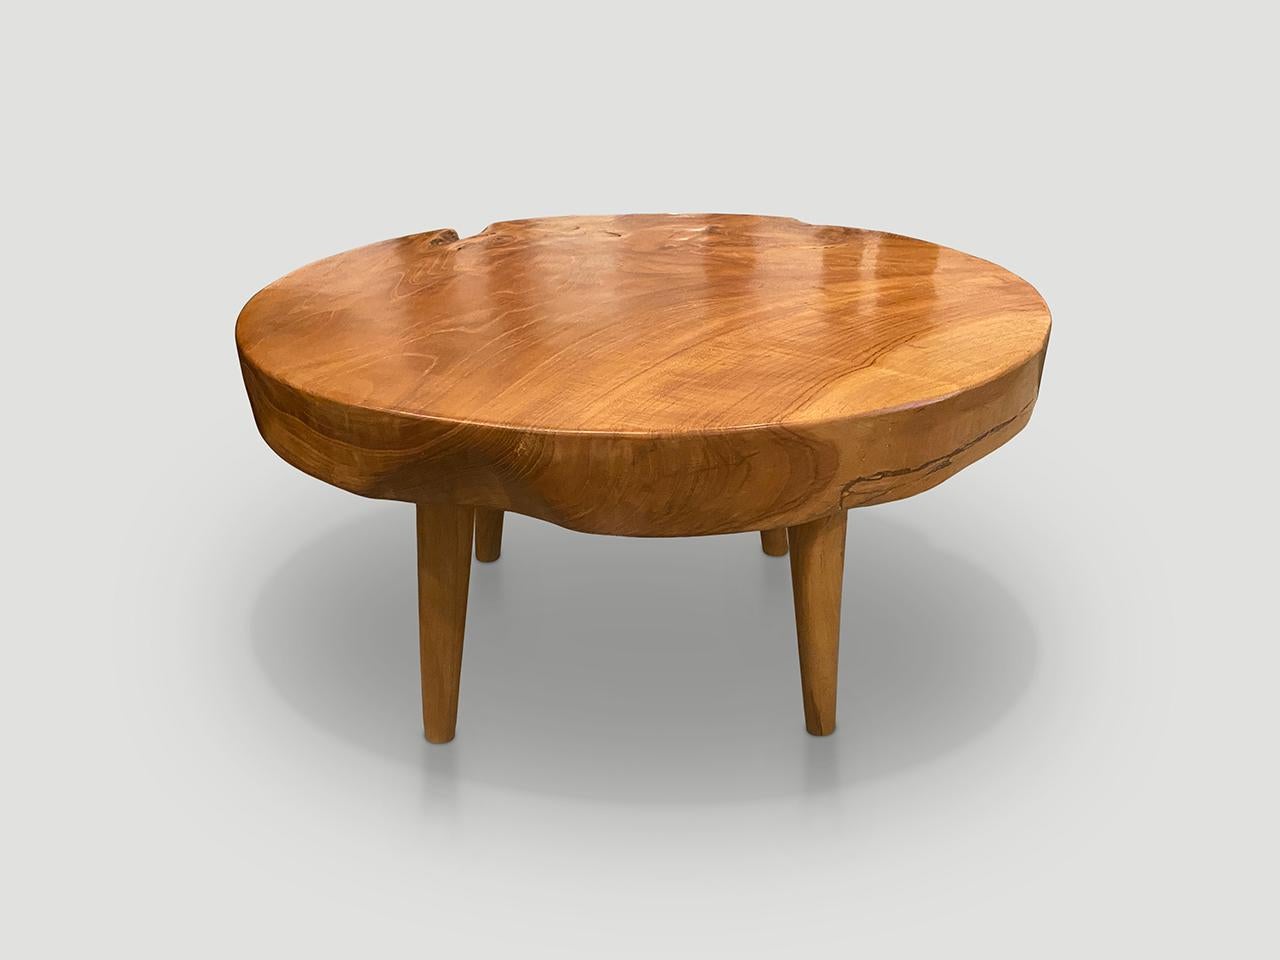 Impressive three inch reclaimed teak wood single slab coffee table. Floating on mid century style cone legs and finished with a natural oil revealing the beautiful wood grain. Organic with a twist. We have a collection. The images and price reflect